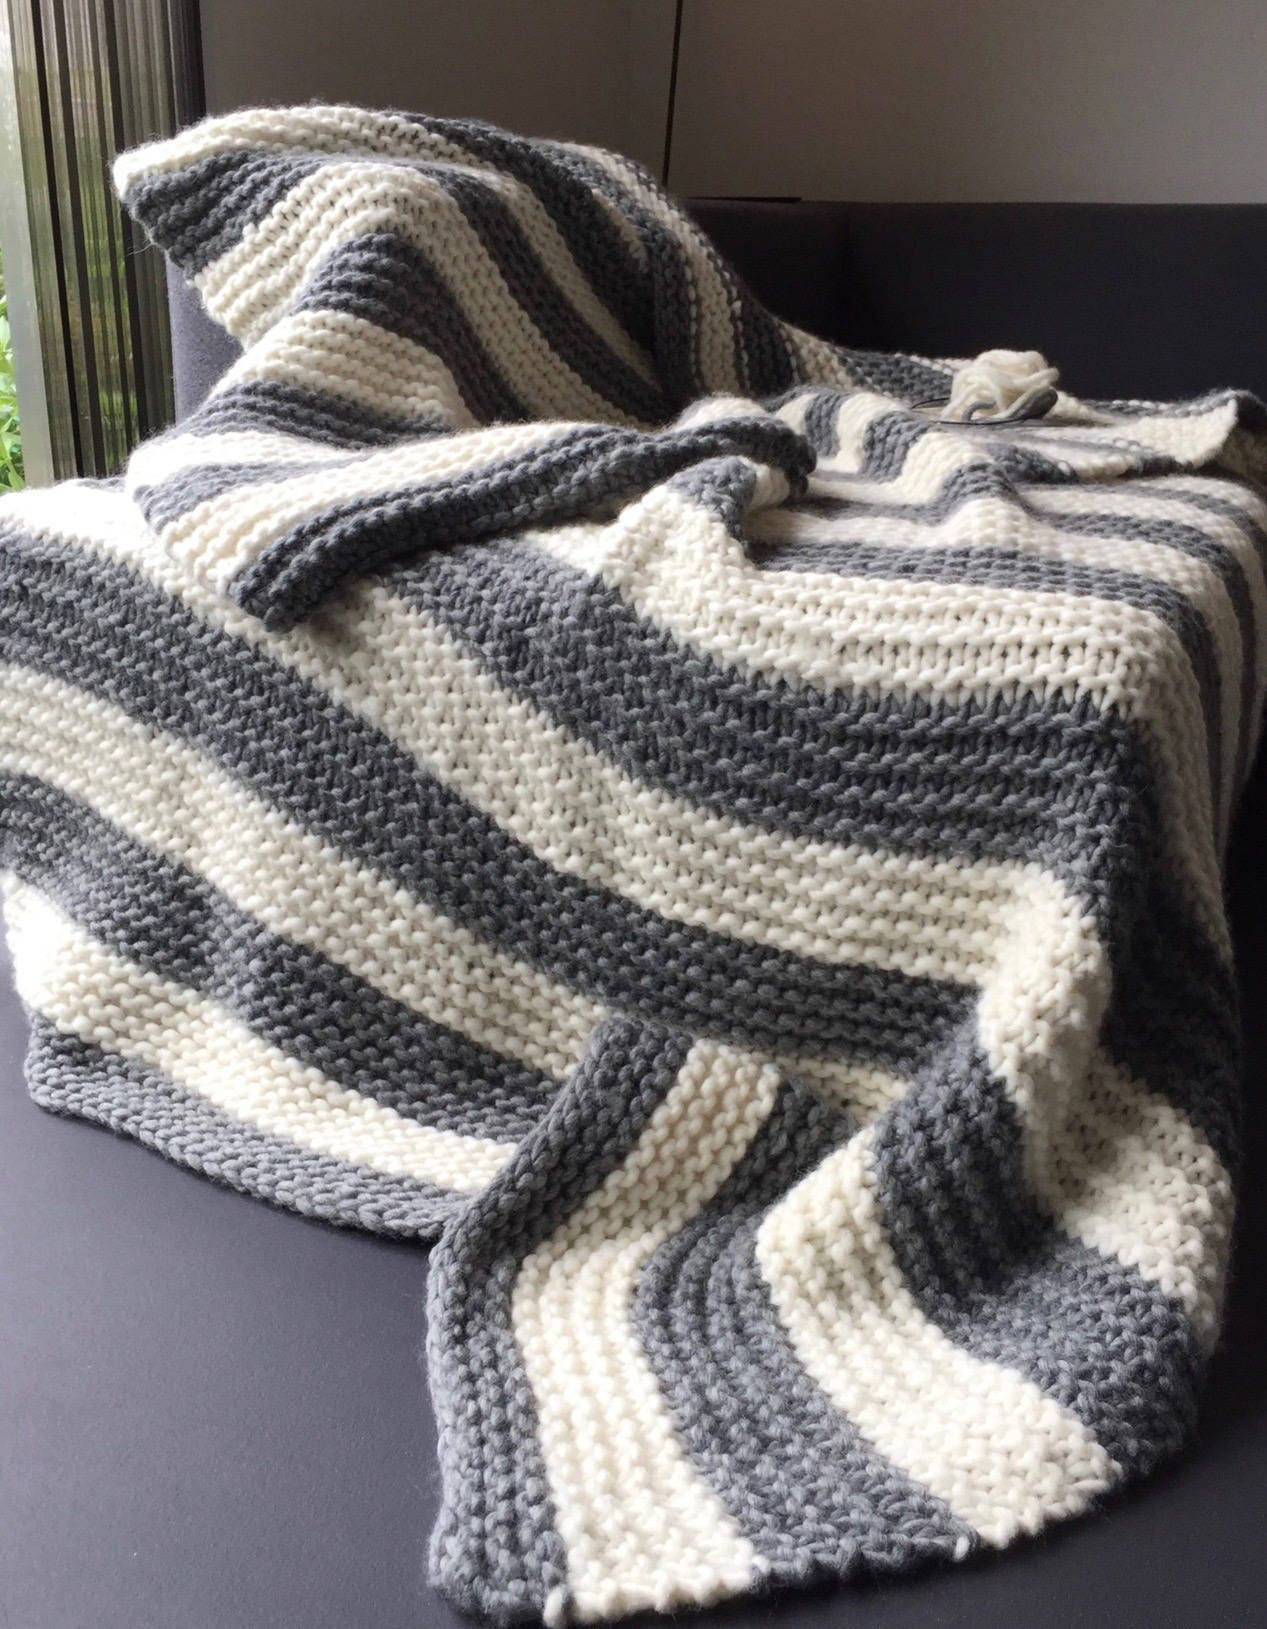 Sale 20 Chunky Knit Blanket Made With Norwegian Wool Warm